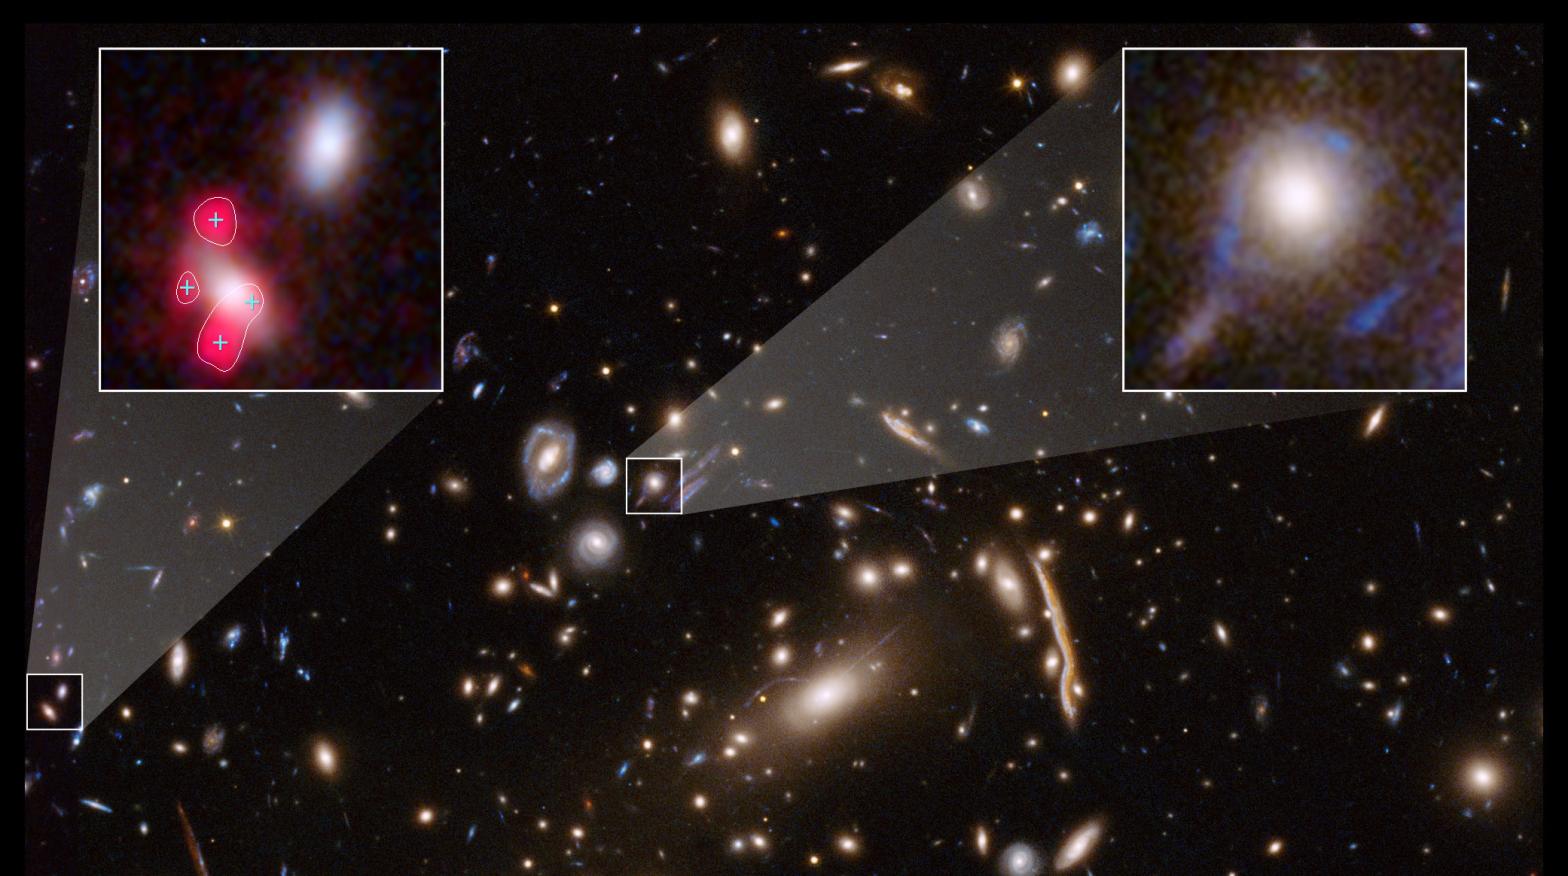 Hubble image showing galaxy cluster MACSJ 1206, with individual galaxies shown inset, and warped by an astronomical effect known as gravitational lensing.  (Image: NASA, ESA, G. Caminha (University of Groningen), M. Meneghetti (INAFObservatory of Astrophysics and Space Science of Bologna), P. Natarajan (Yale University), CLASH team)